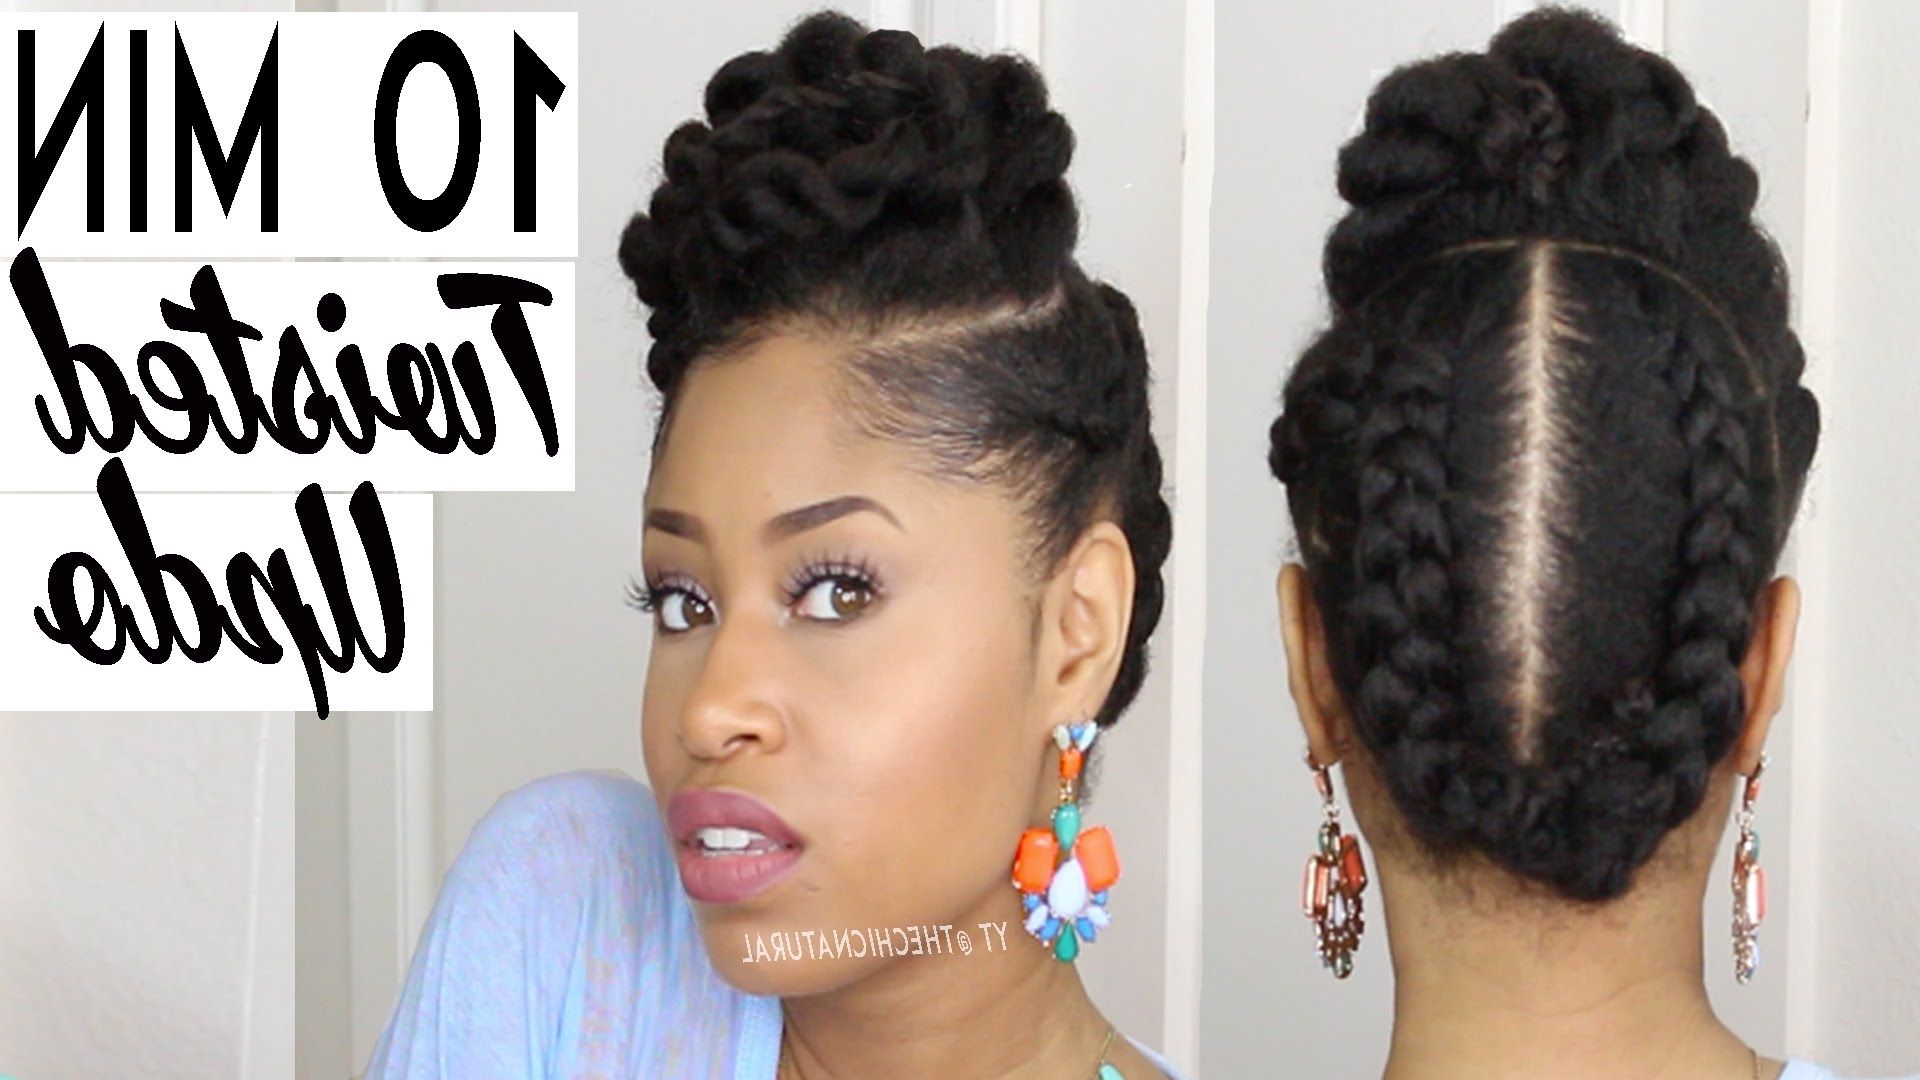 The 10 Minute Twisted Updo | Natural Hairstyle – Youtube With Updo Hairstyles For Natural Black Hair (View 1 of 15)